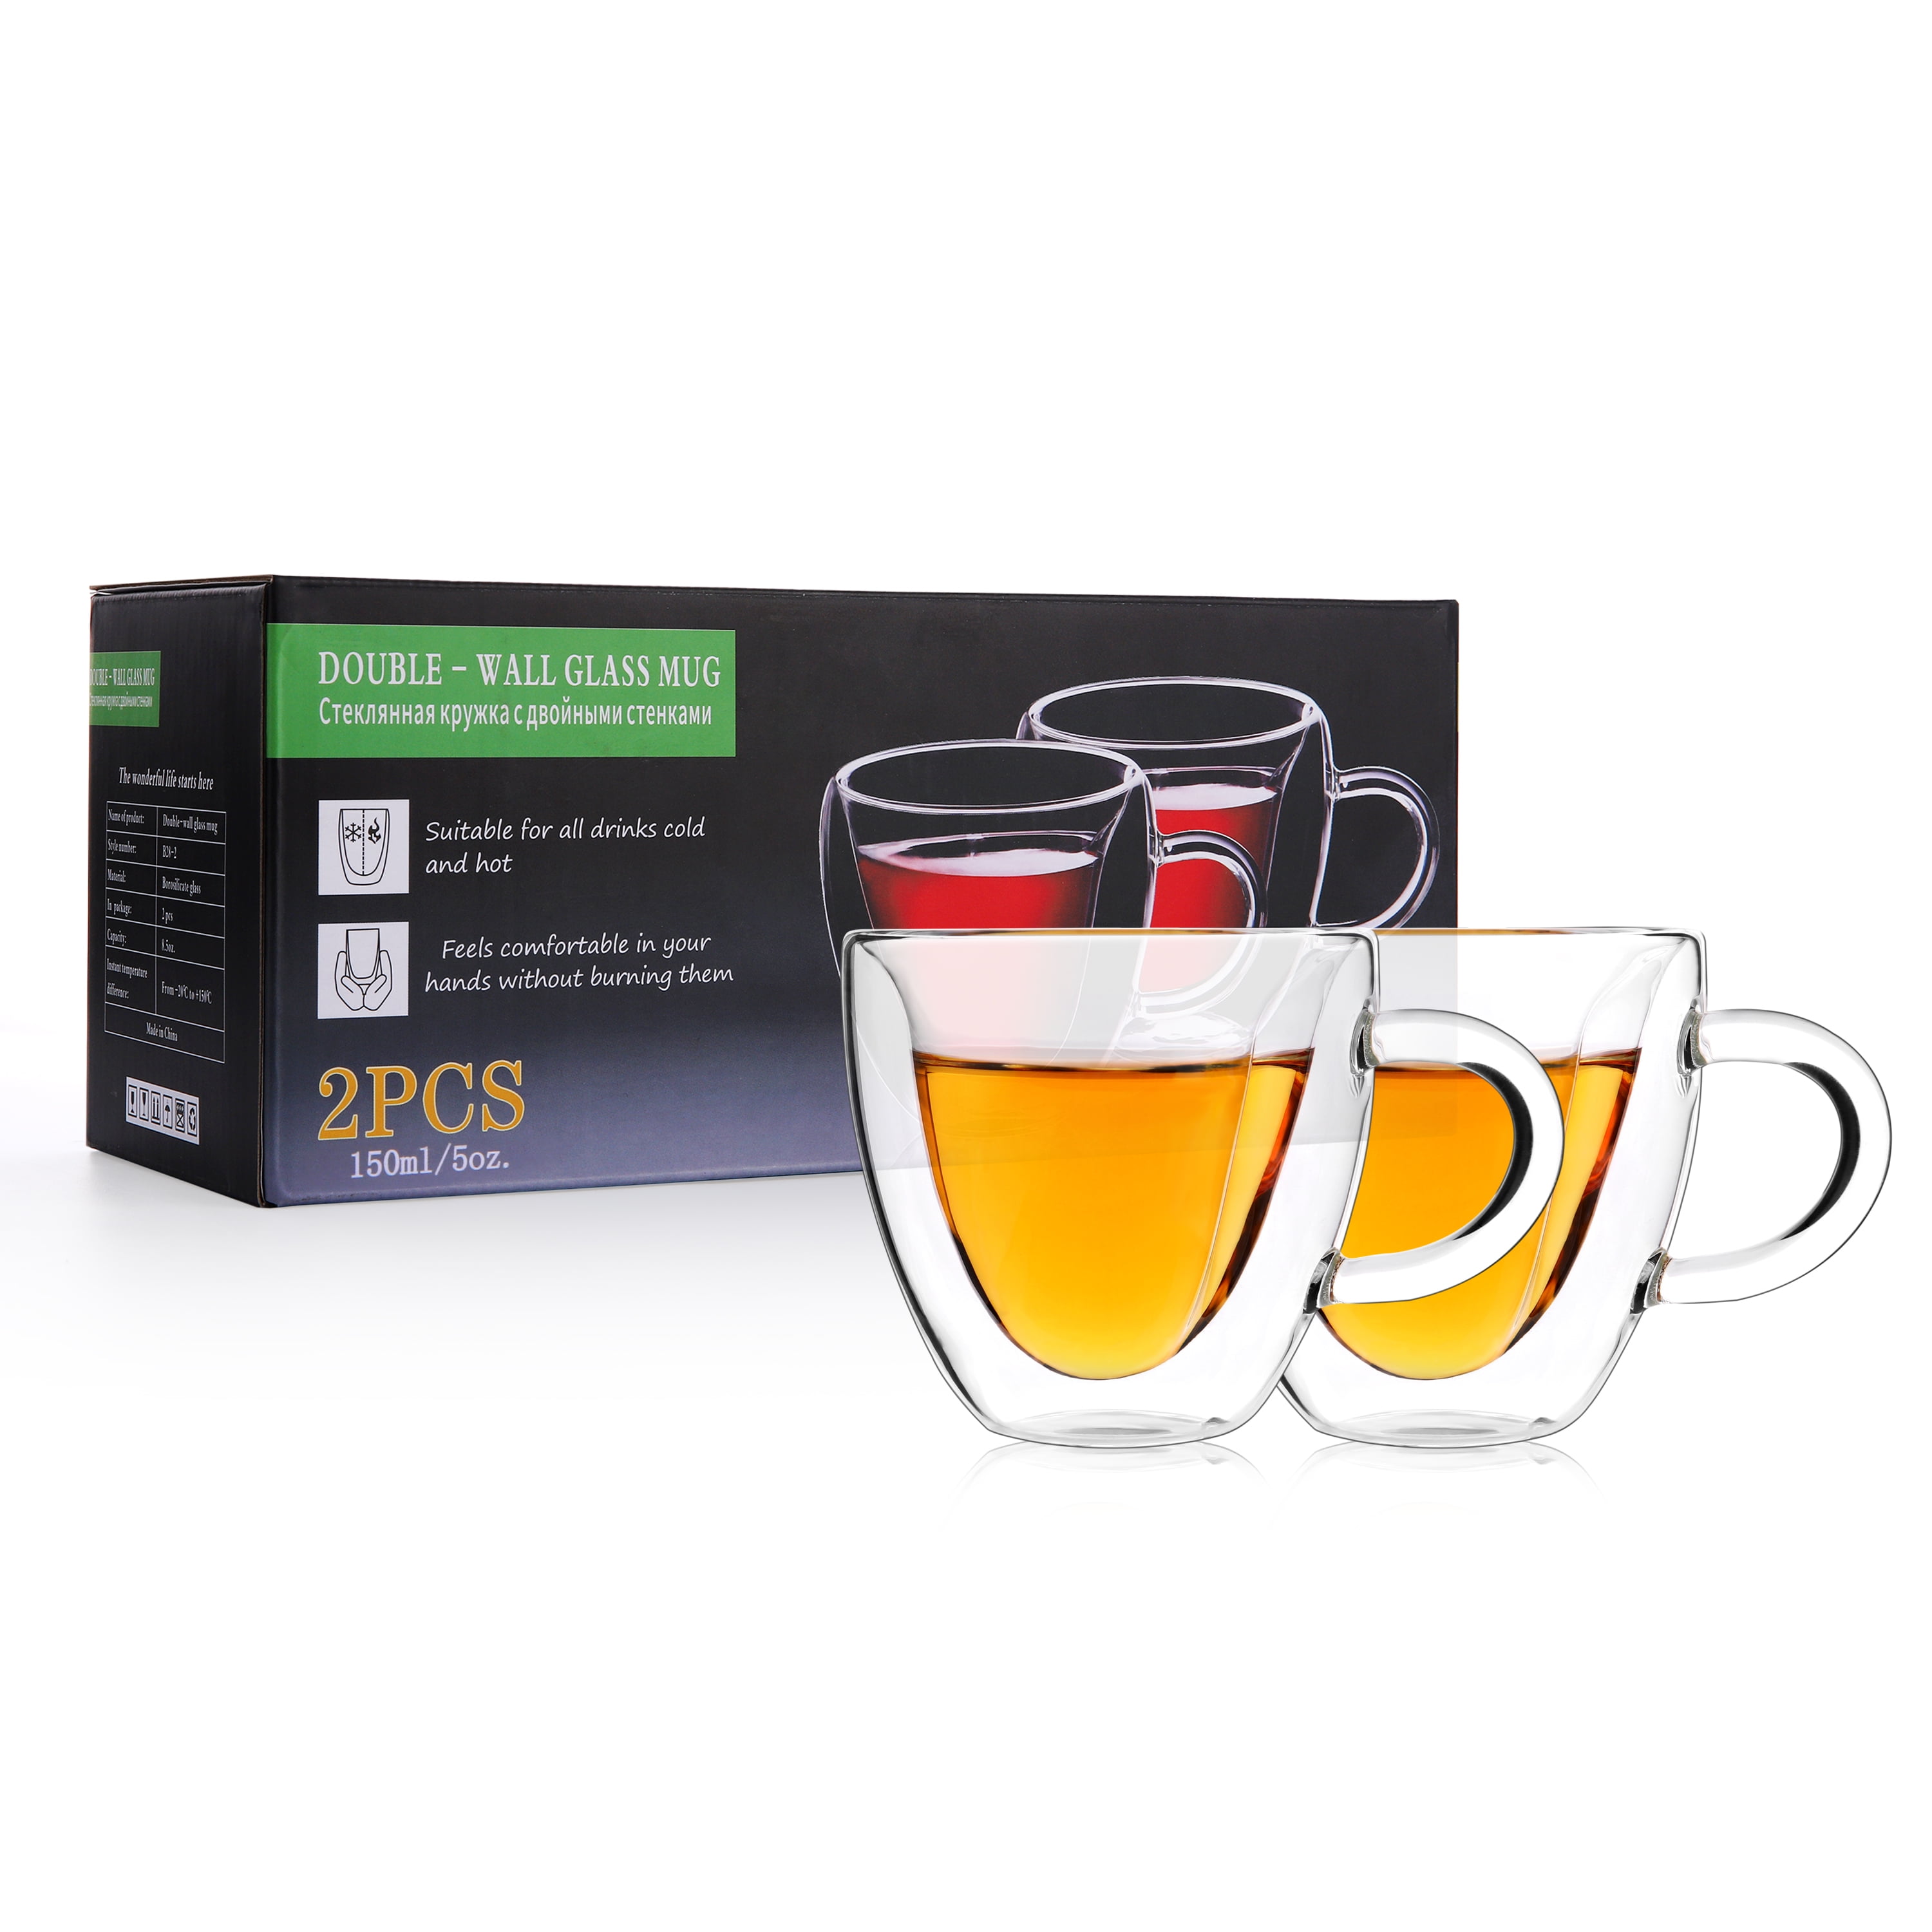 Sips by Double-Wall Heart Glass Mug | 8 oz Capacity | Prevents Condensation | Heart Shaped Interior | Perfect for Tea | Tea Gift Sets